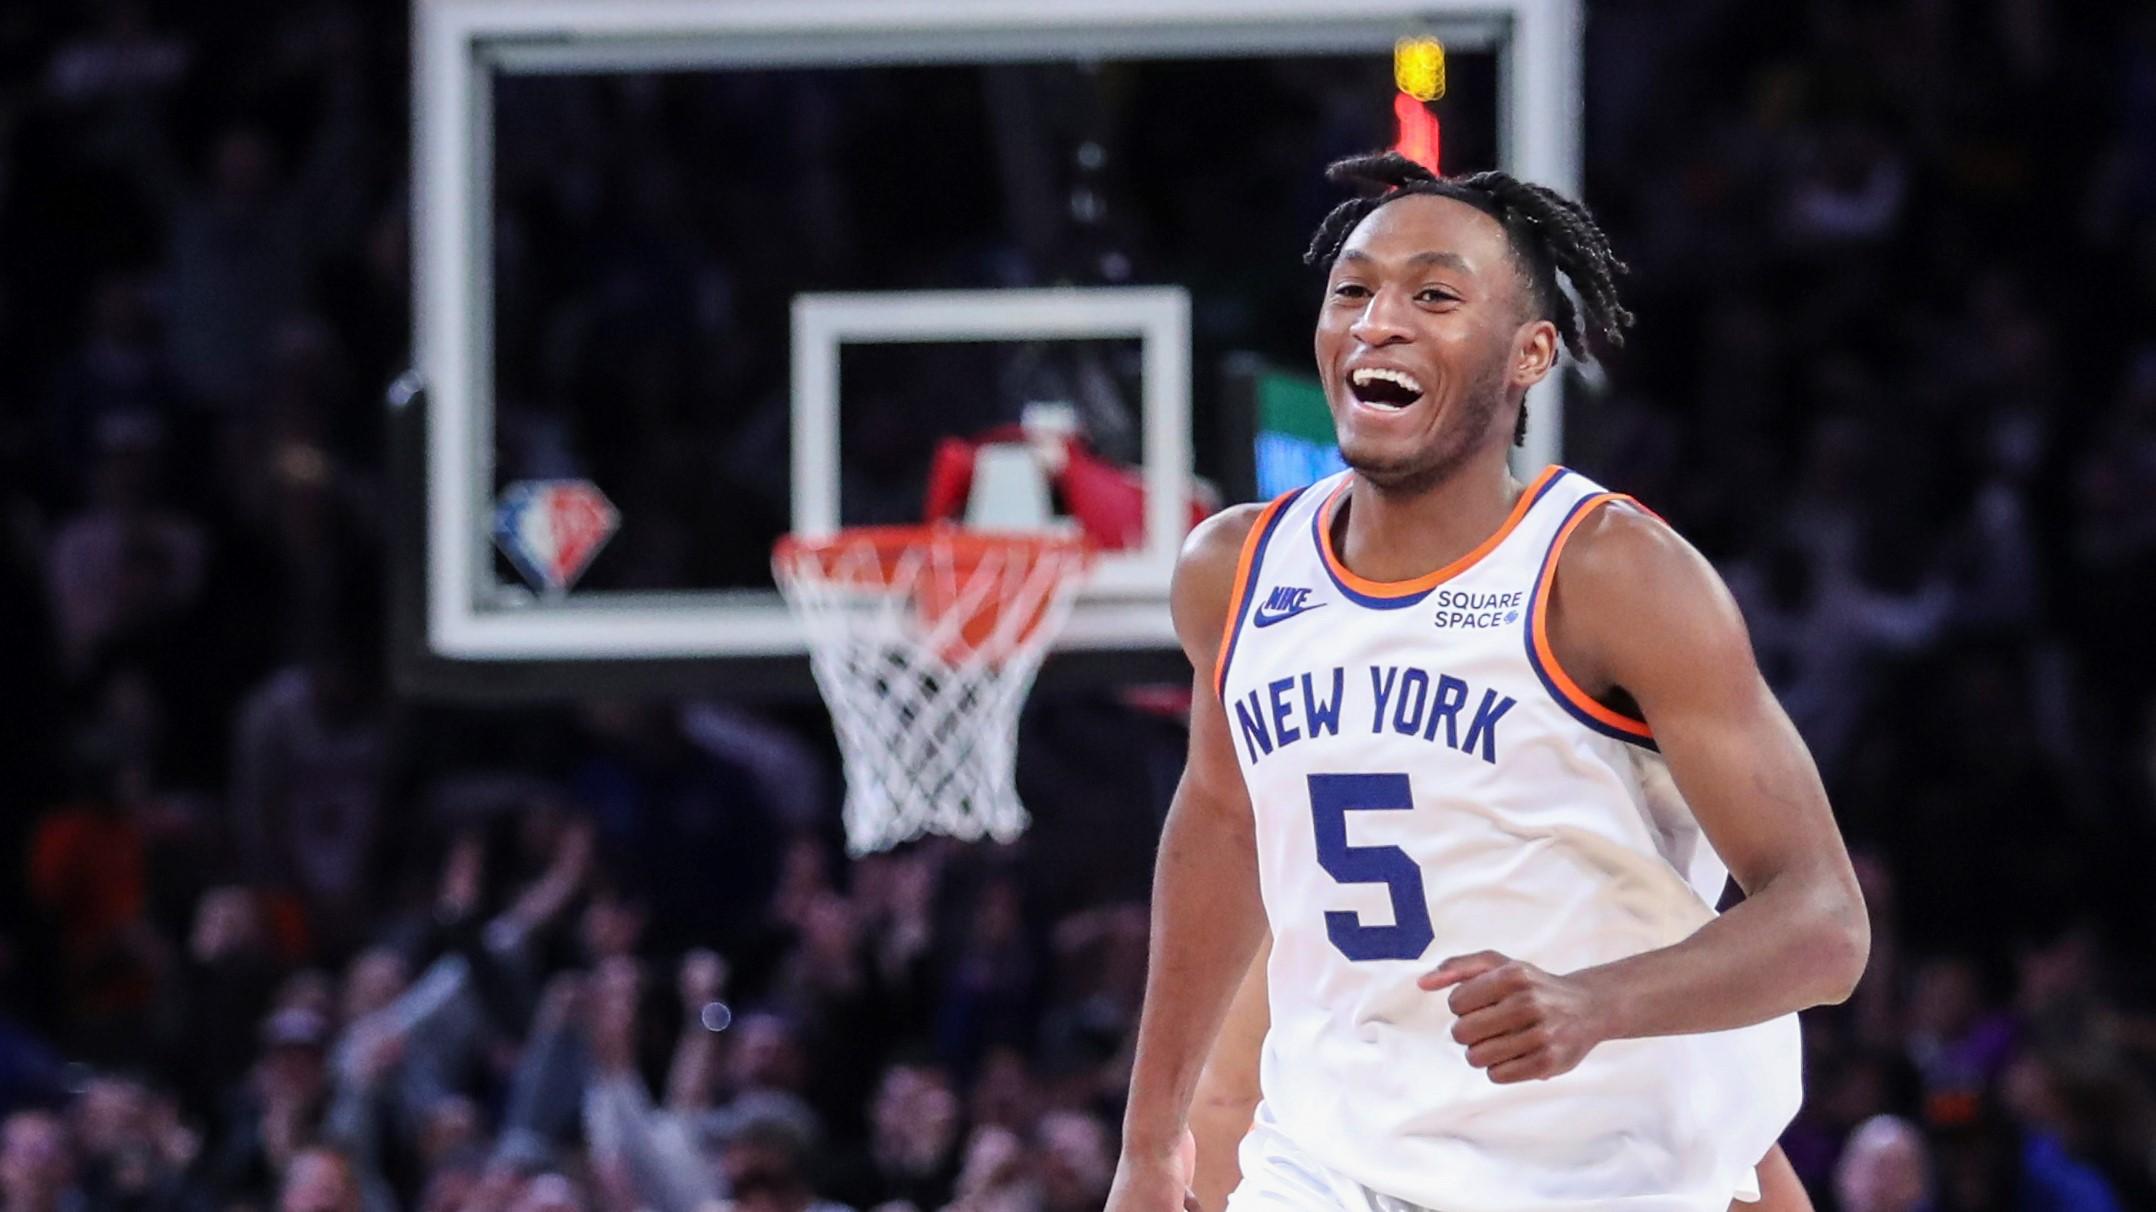 Nov 10, 2021; New York, New York, USA; New York Knicks guard Immanuel Quickley (5) celebrates during a timeout in the fourth quarter against the Milwaukee Bucks at Madison Square Garden. Mandatory Credit: Wendell Cruz-USA TODAY Sports / Wendell Cruz-USA TODAY Sports